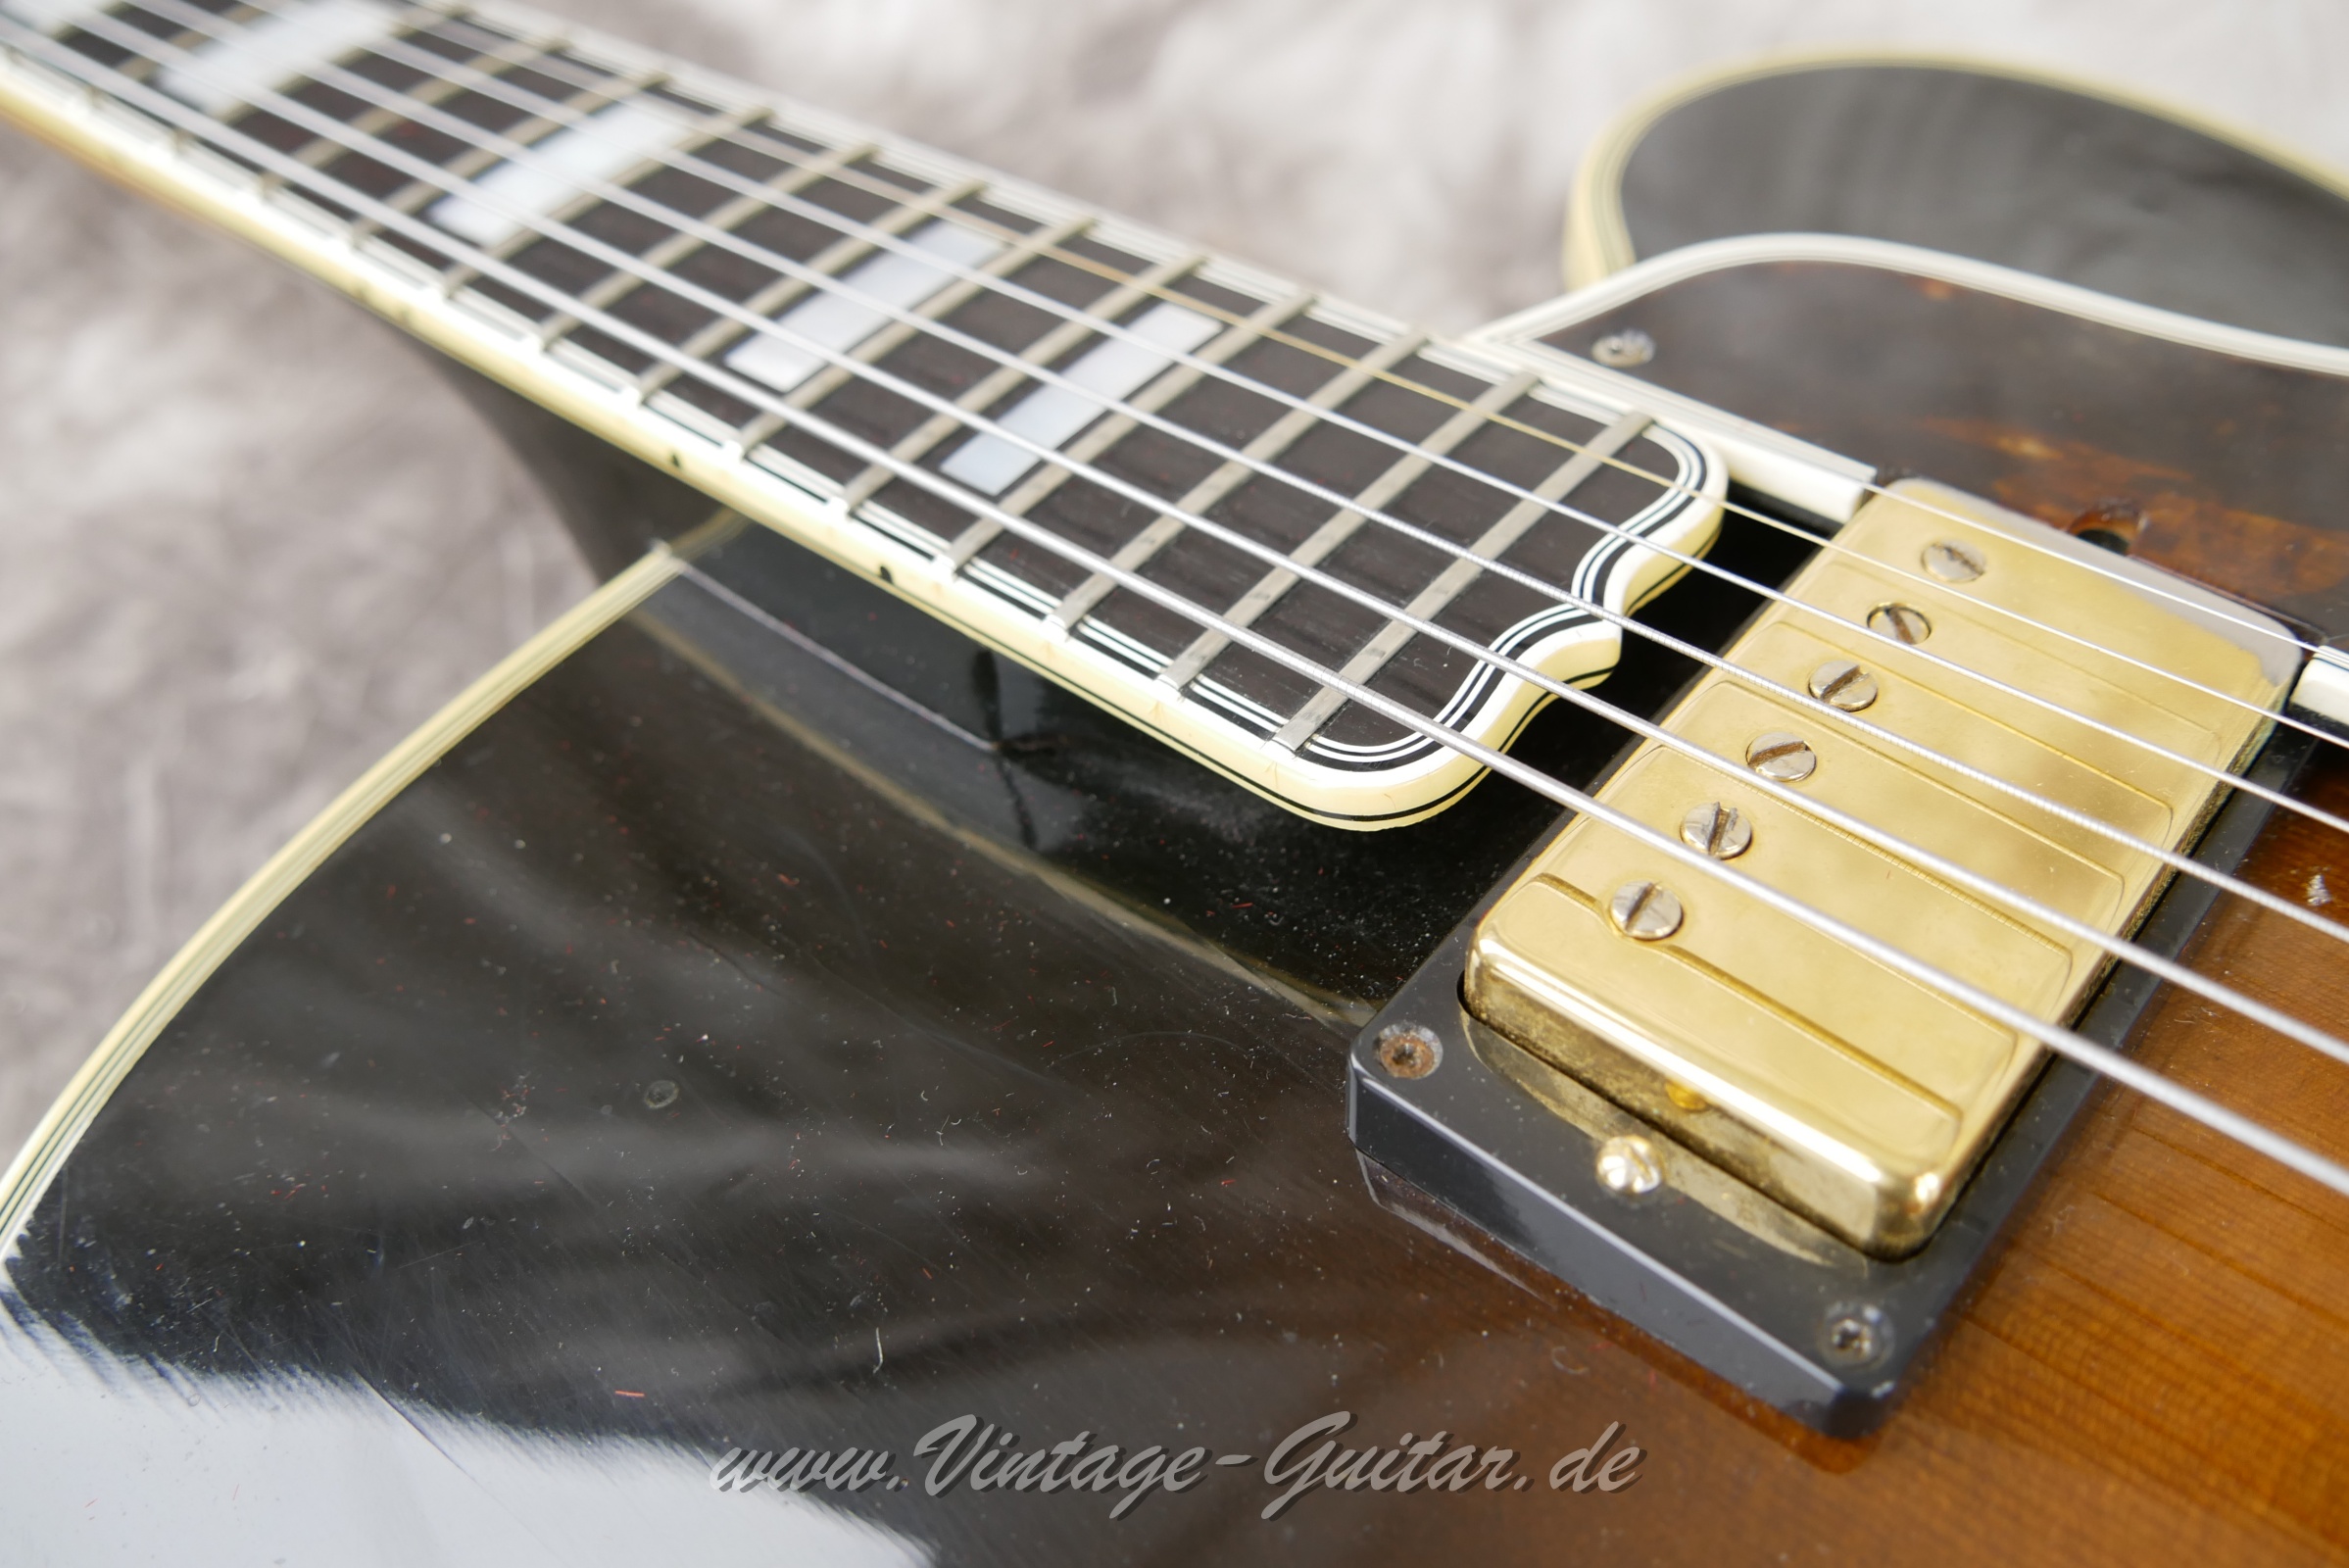 Gibson-L5-Wes-Montgomery-1993-Master-Model-James-Hutchins-014.JPG